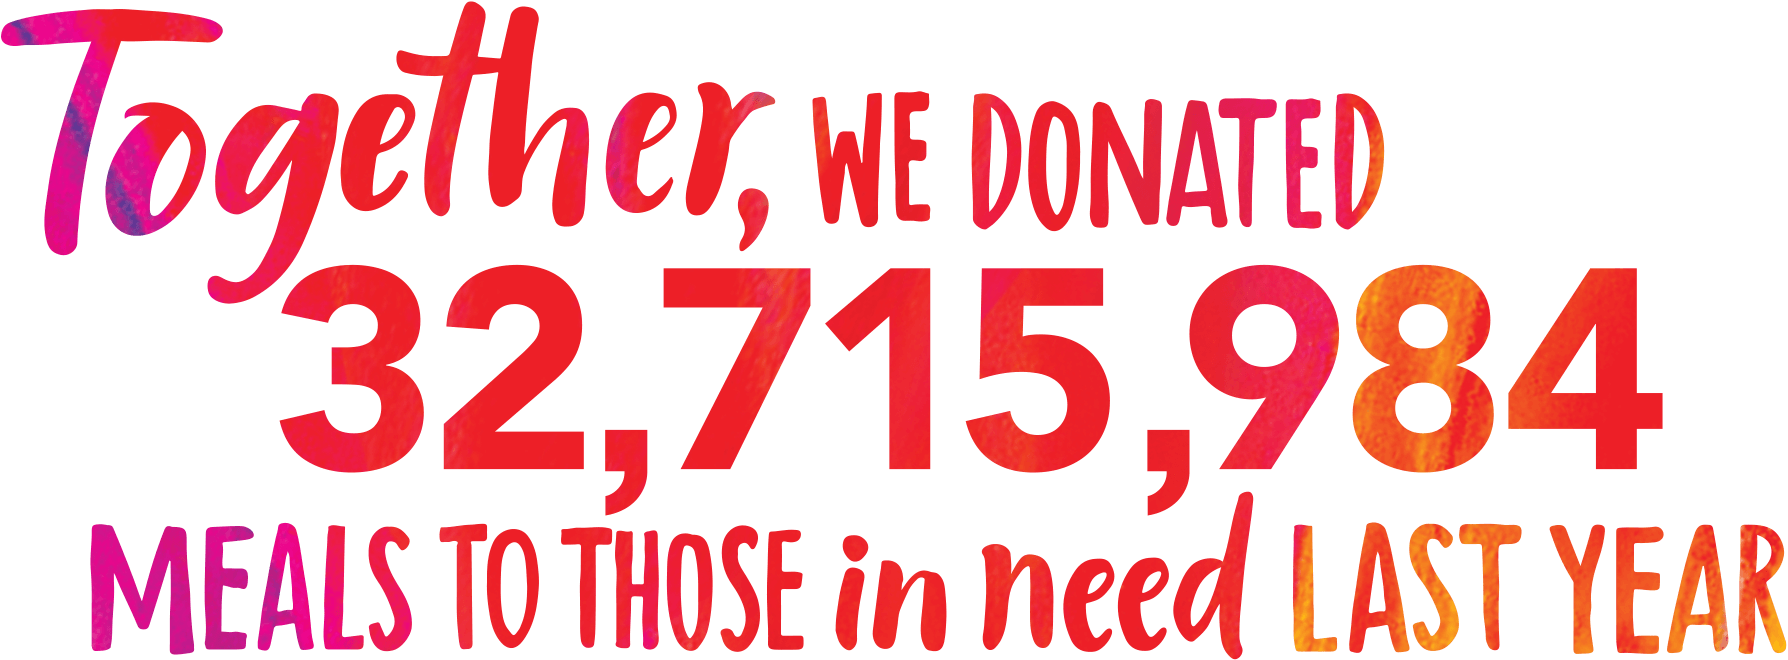 Together, we donated 32,715,984 meals to those in need last year